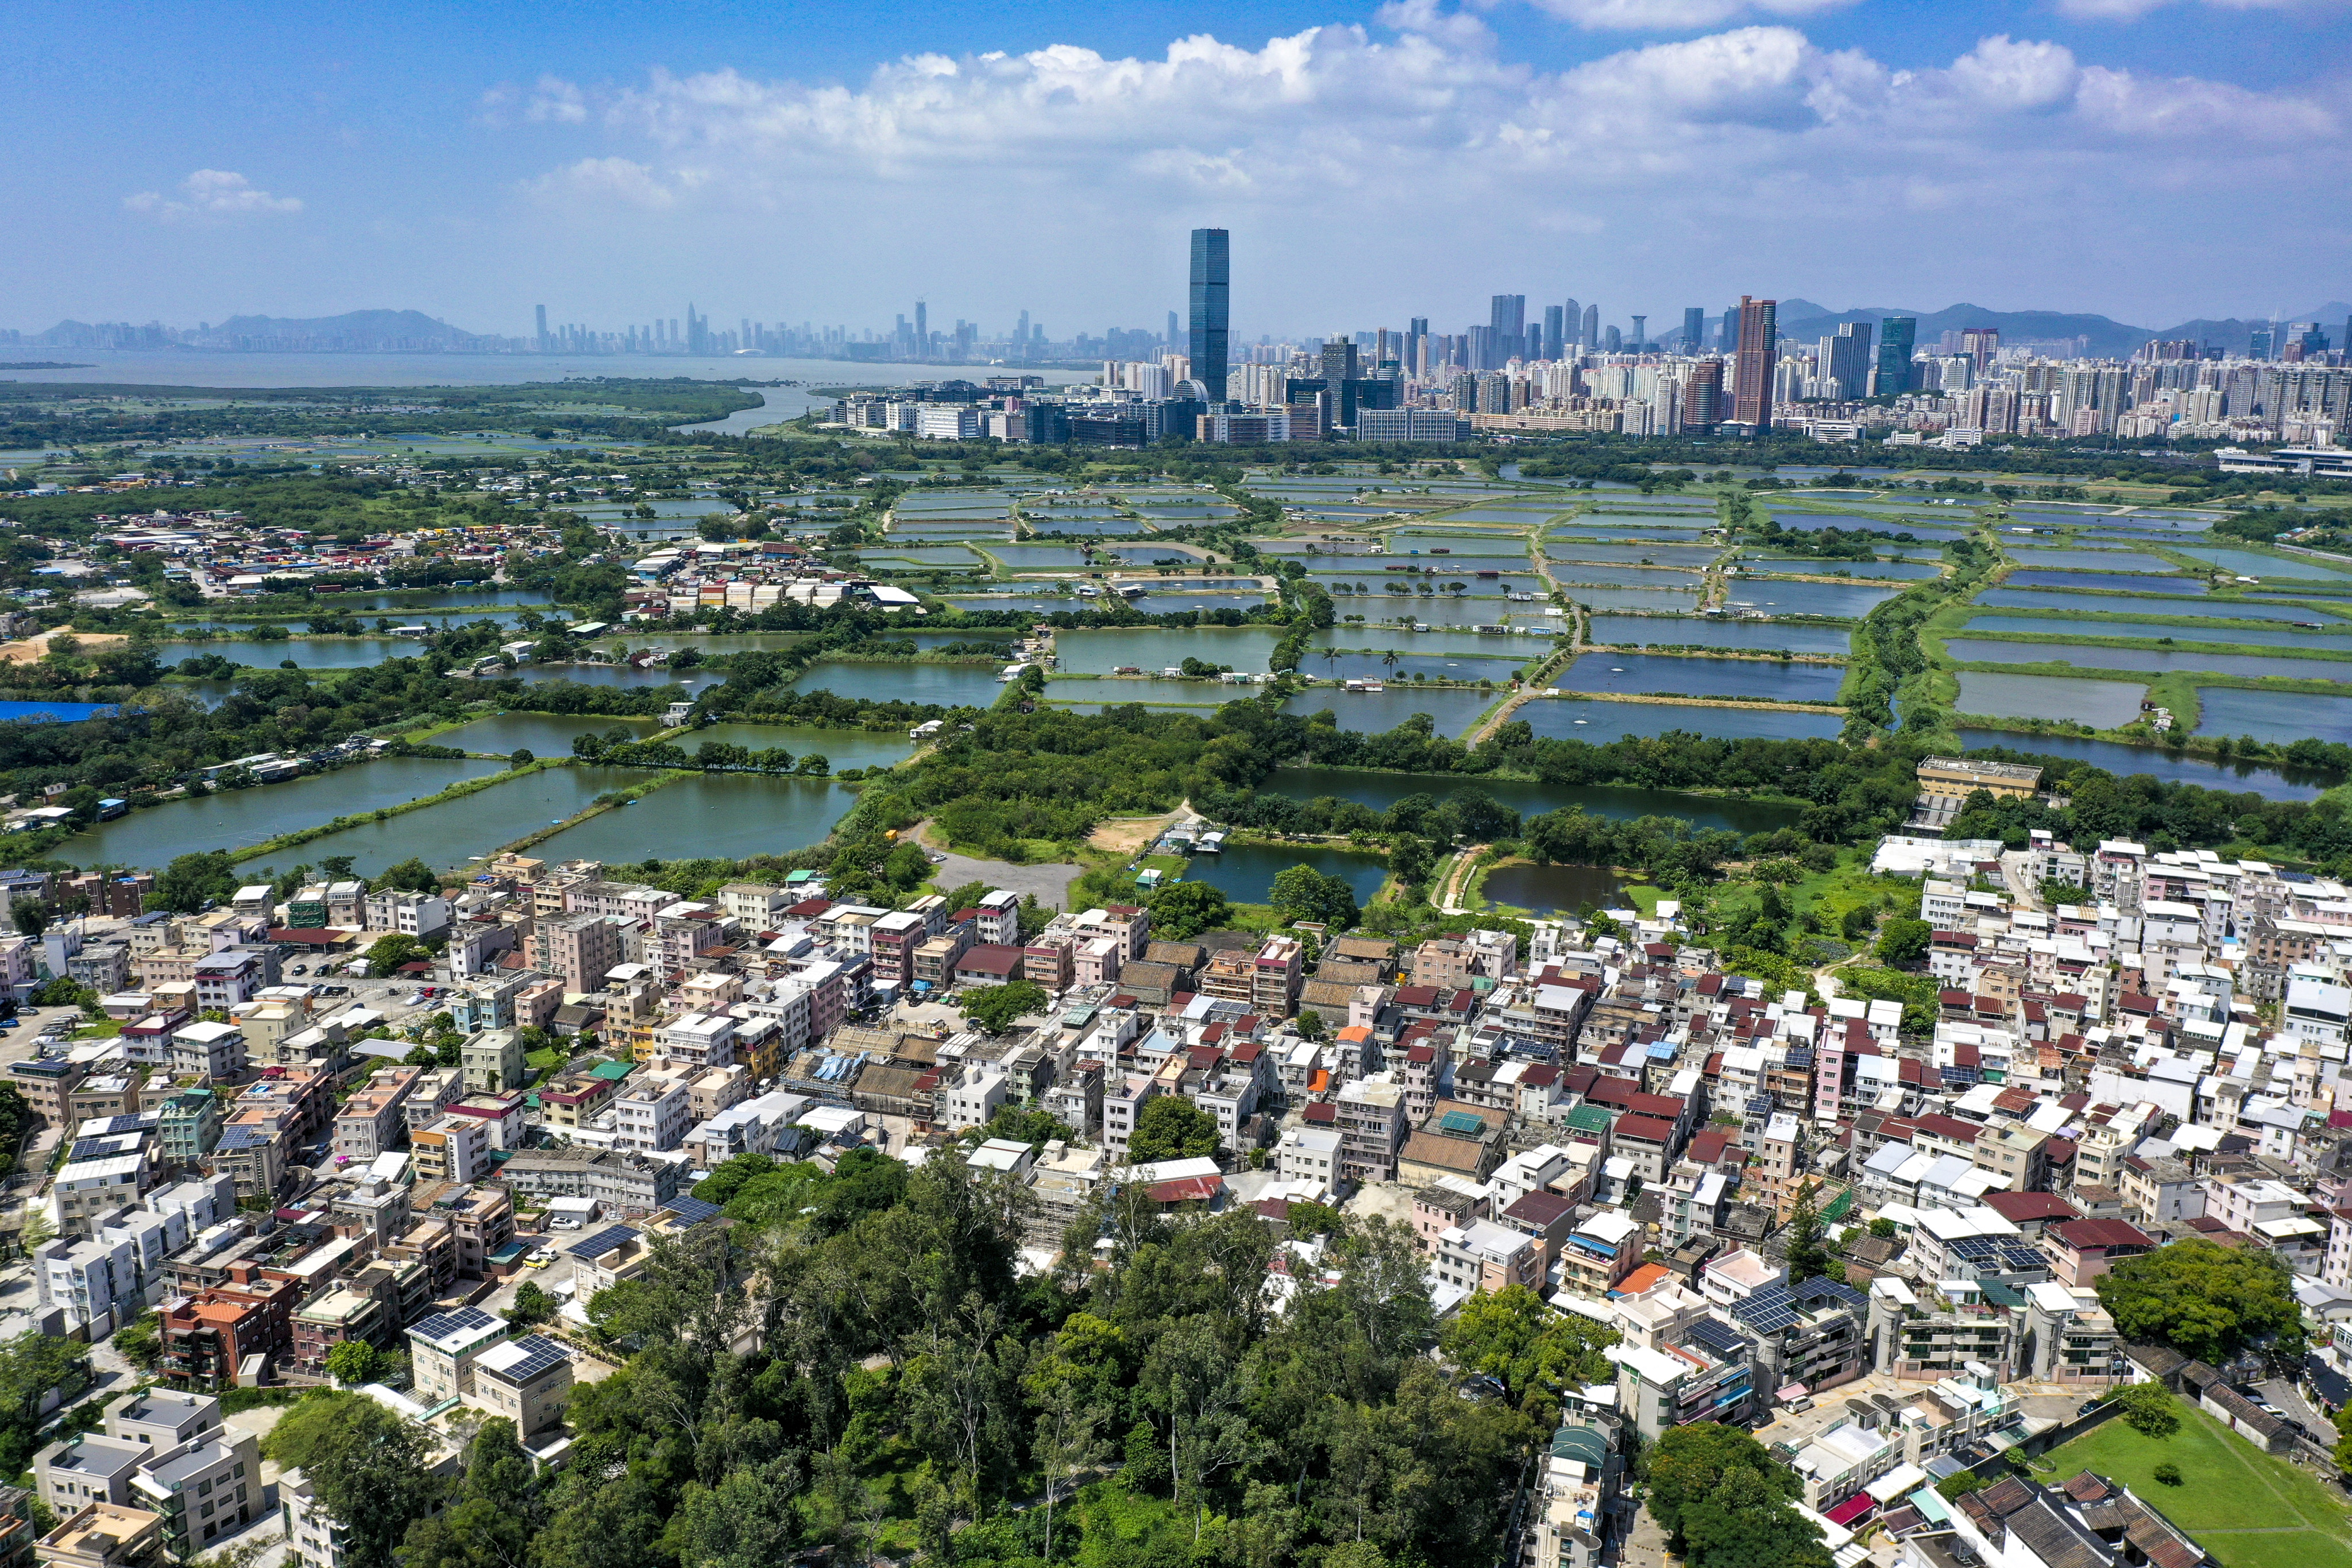 An aerial view of the San Tin area in the New Territories, the proposed site of new housing development and an innovation and technology hub. The San Tin Technopole is part of Hong Kong’s push to promote itself as a global innovator and a key part of China’s technological development. Photo: Winson Wong